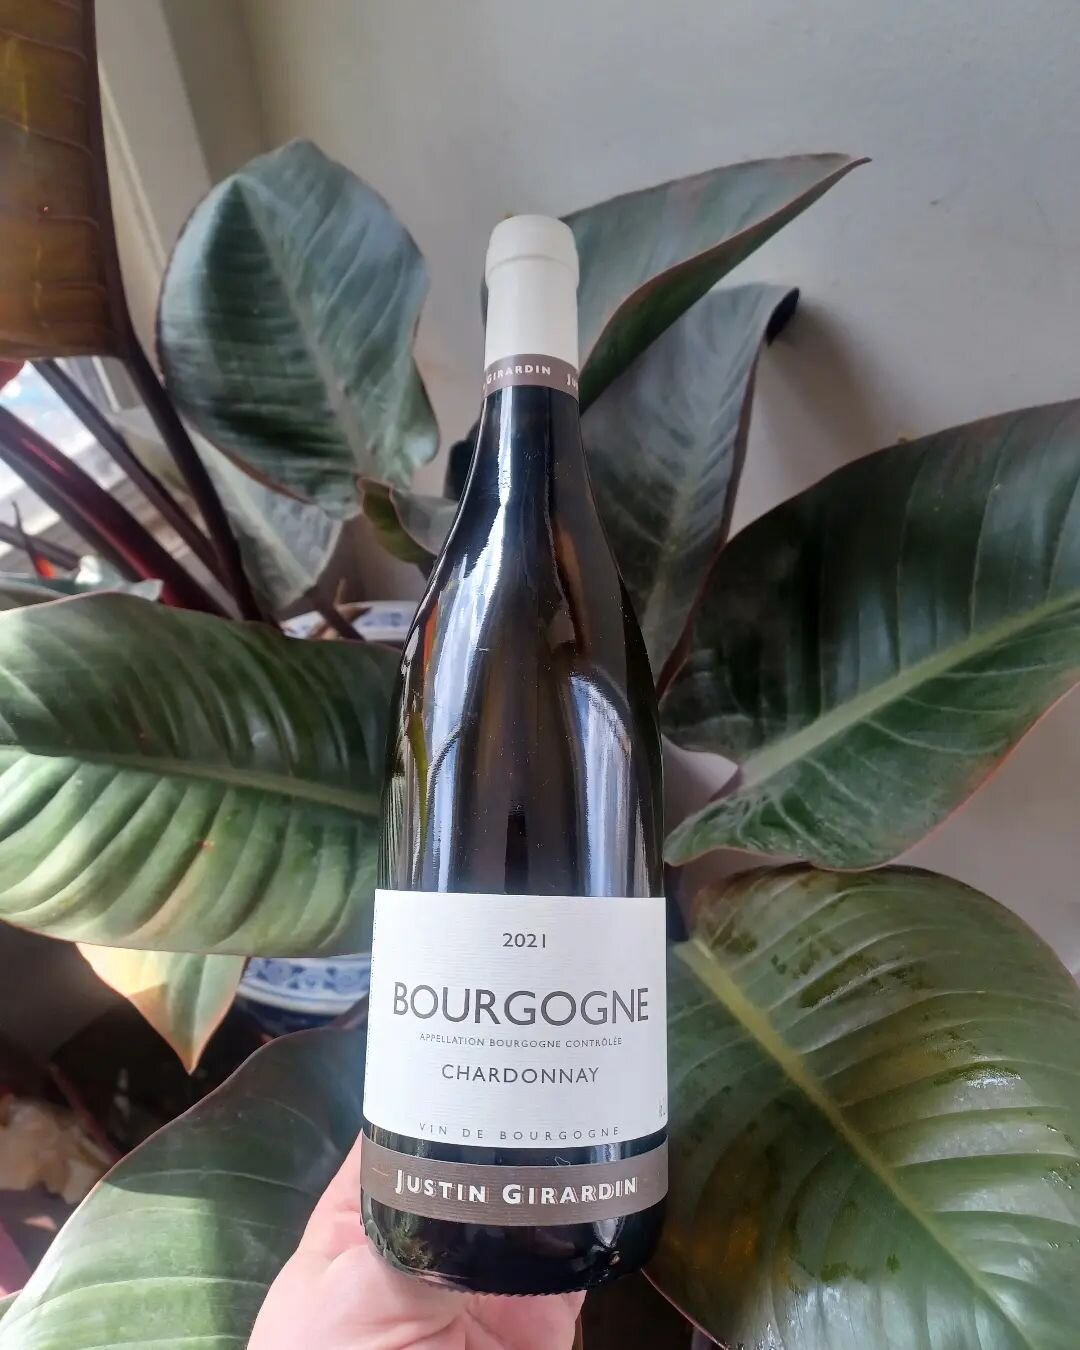 Beautiful 2021 Burgundy from @girardinjustin !

Triple sorted Chard from 25y.o vines. Aged half in barrel, half in stainless. True modern Bourgogne, ready for Springtime.

🍎🍋🍍🍯

12pk / $36lic